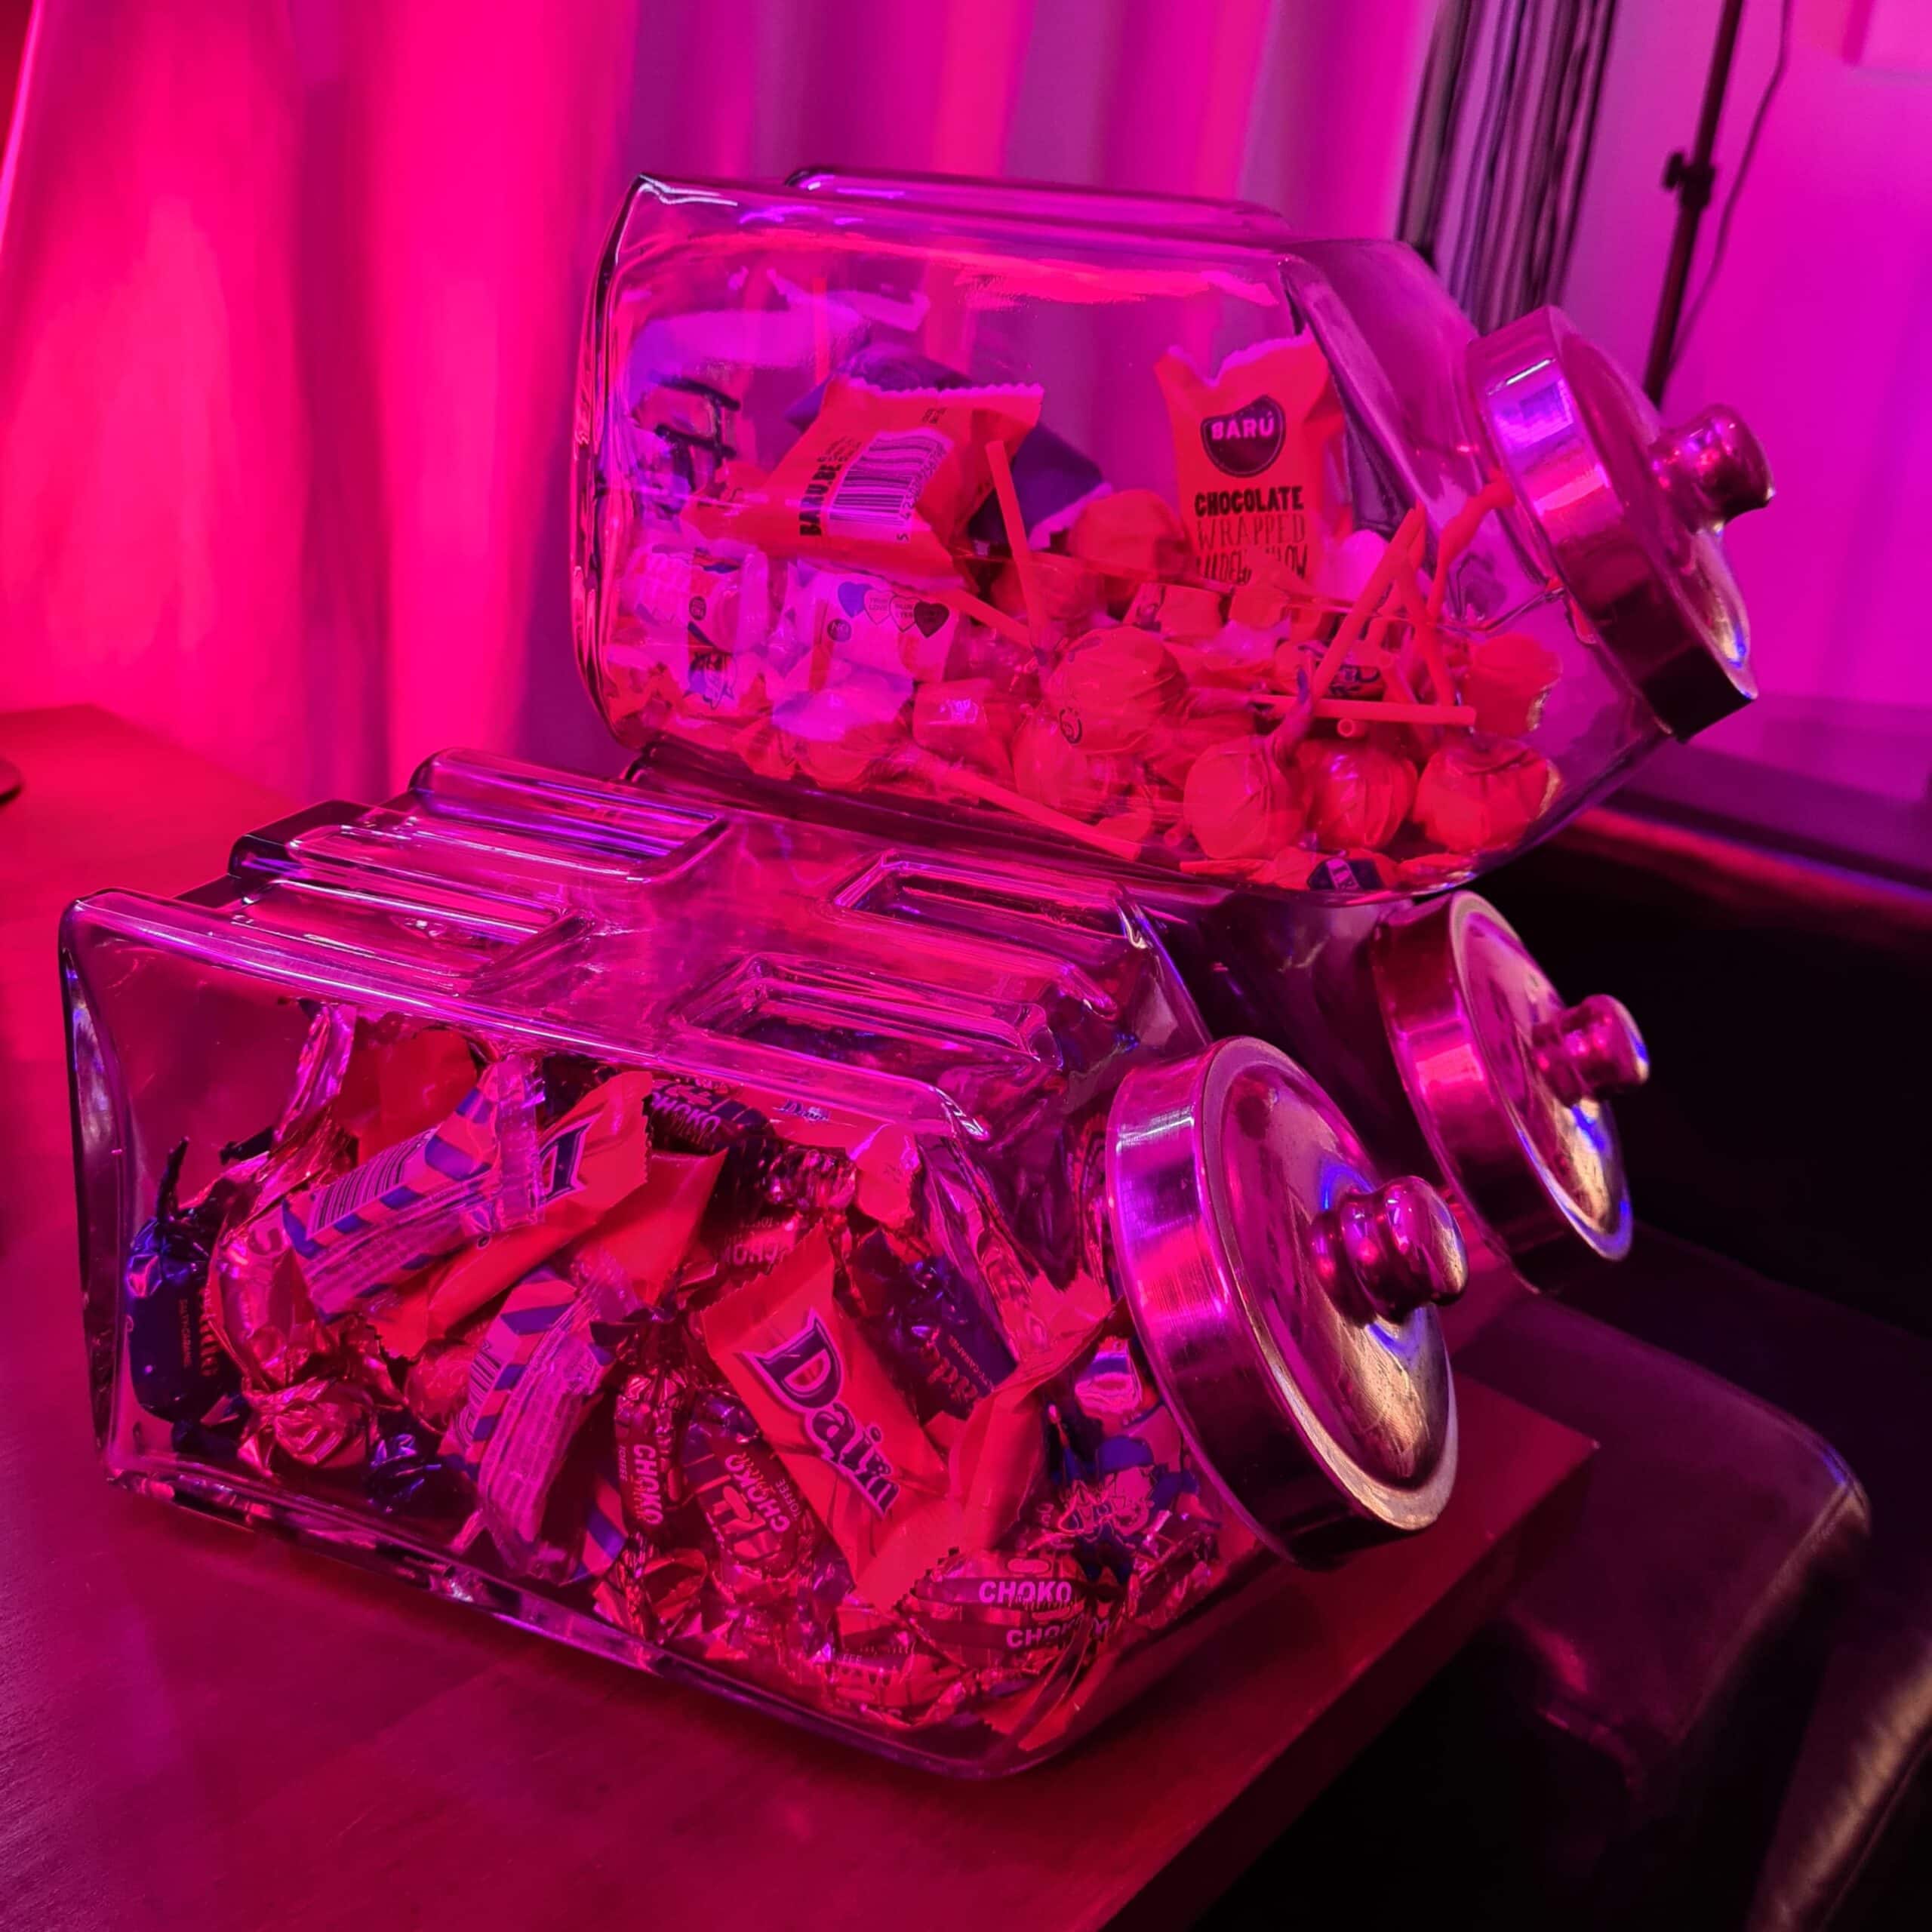 What every gaming room needs is a candy jars filled with candy